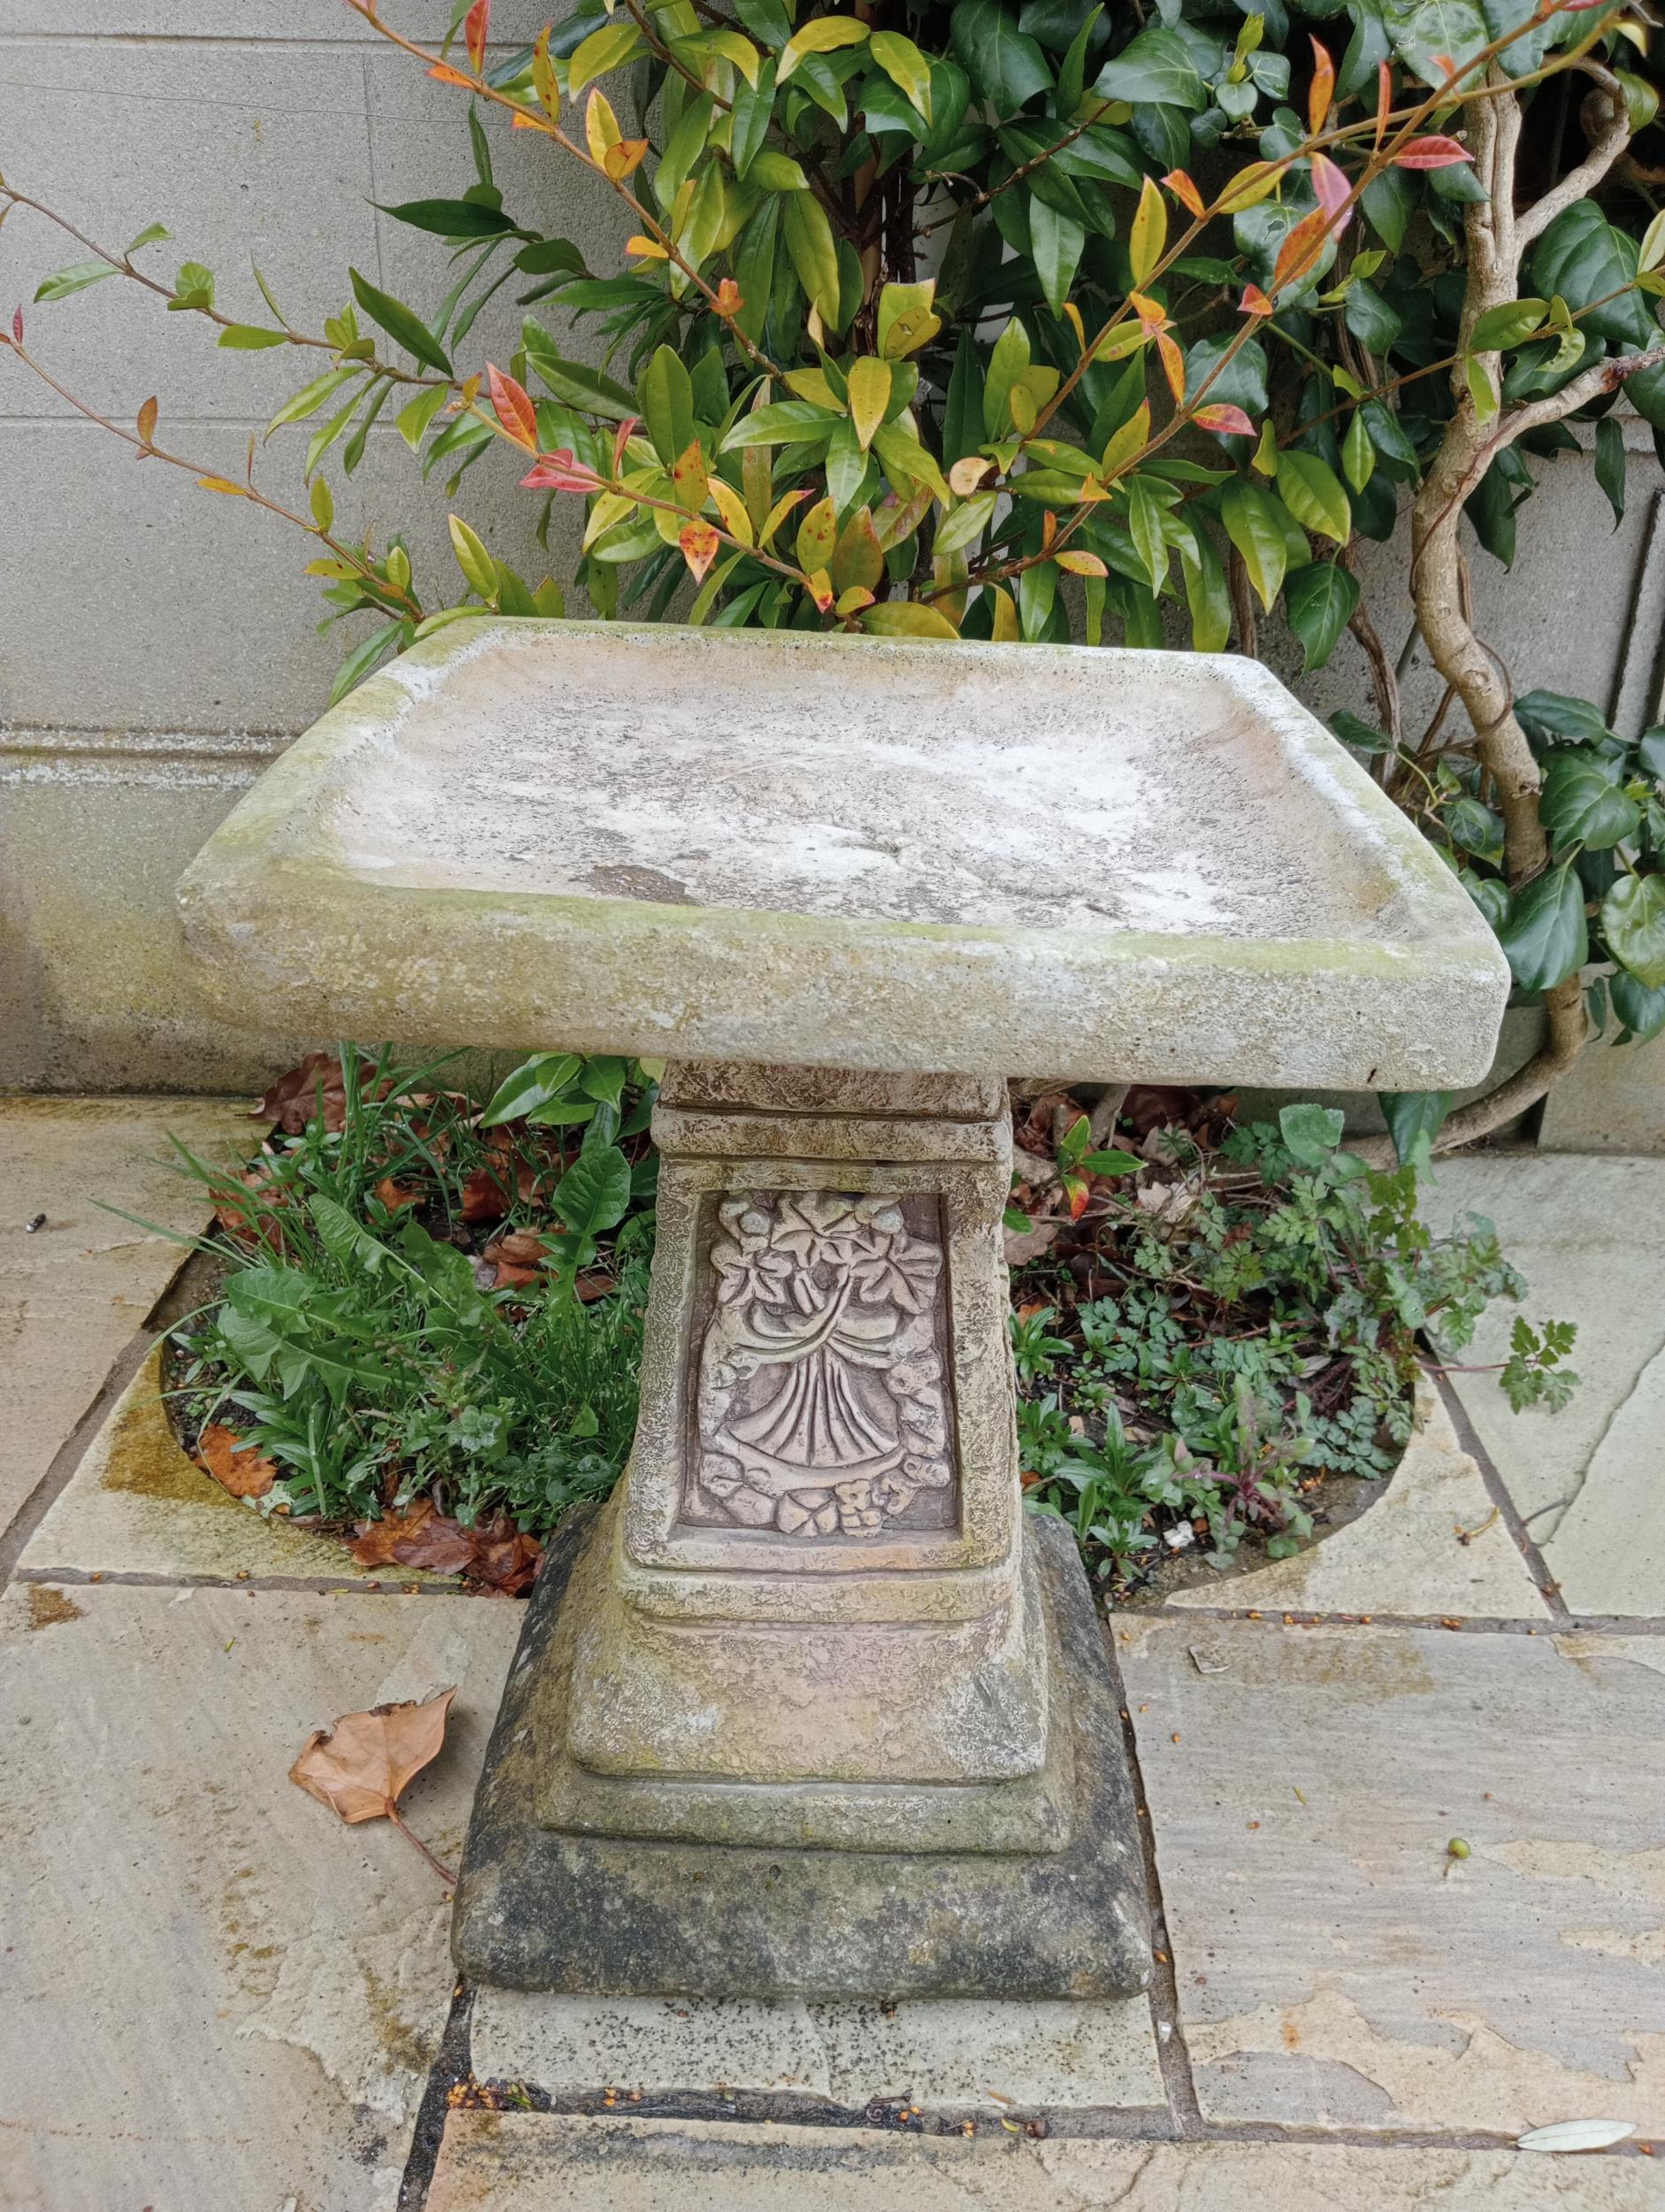 Composition bird bath {H 53cm x D 4cm x D 4cm }. (NOT AVAILABLE TO VIEW IN PERSON)